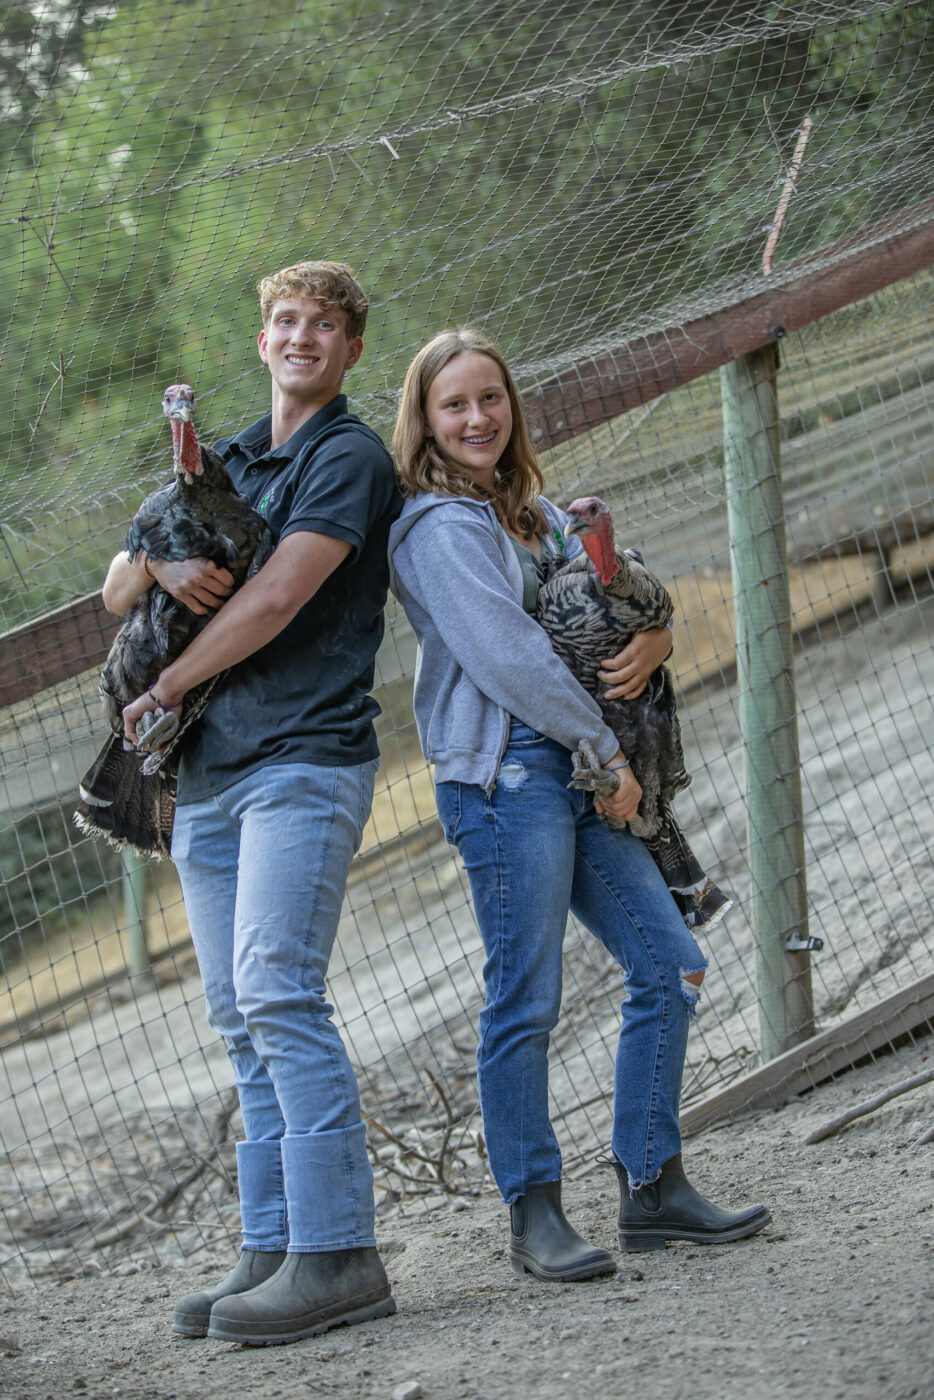 Siblings Ella and Nico Bartolomei have been involved with 4-H for several years. Ella says the turkeys calls often make her laugh. (Chad Surmick/The Press Democrat)